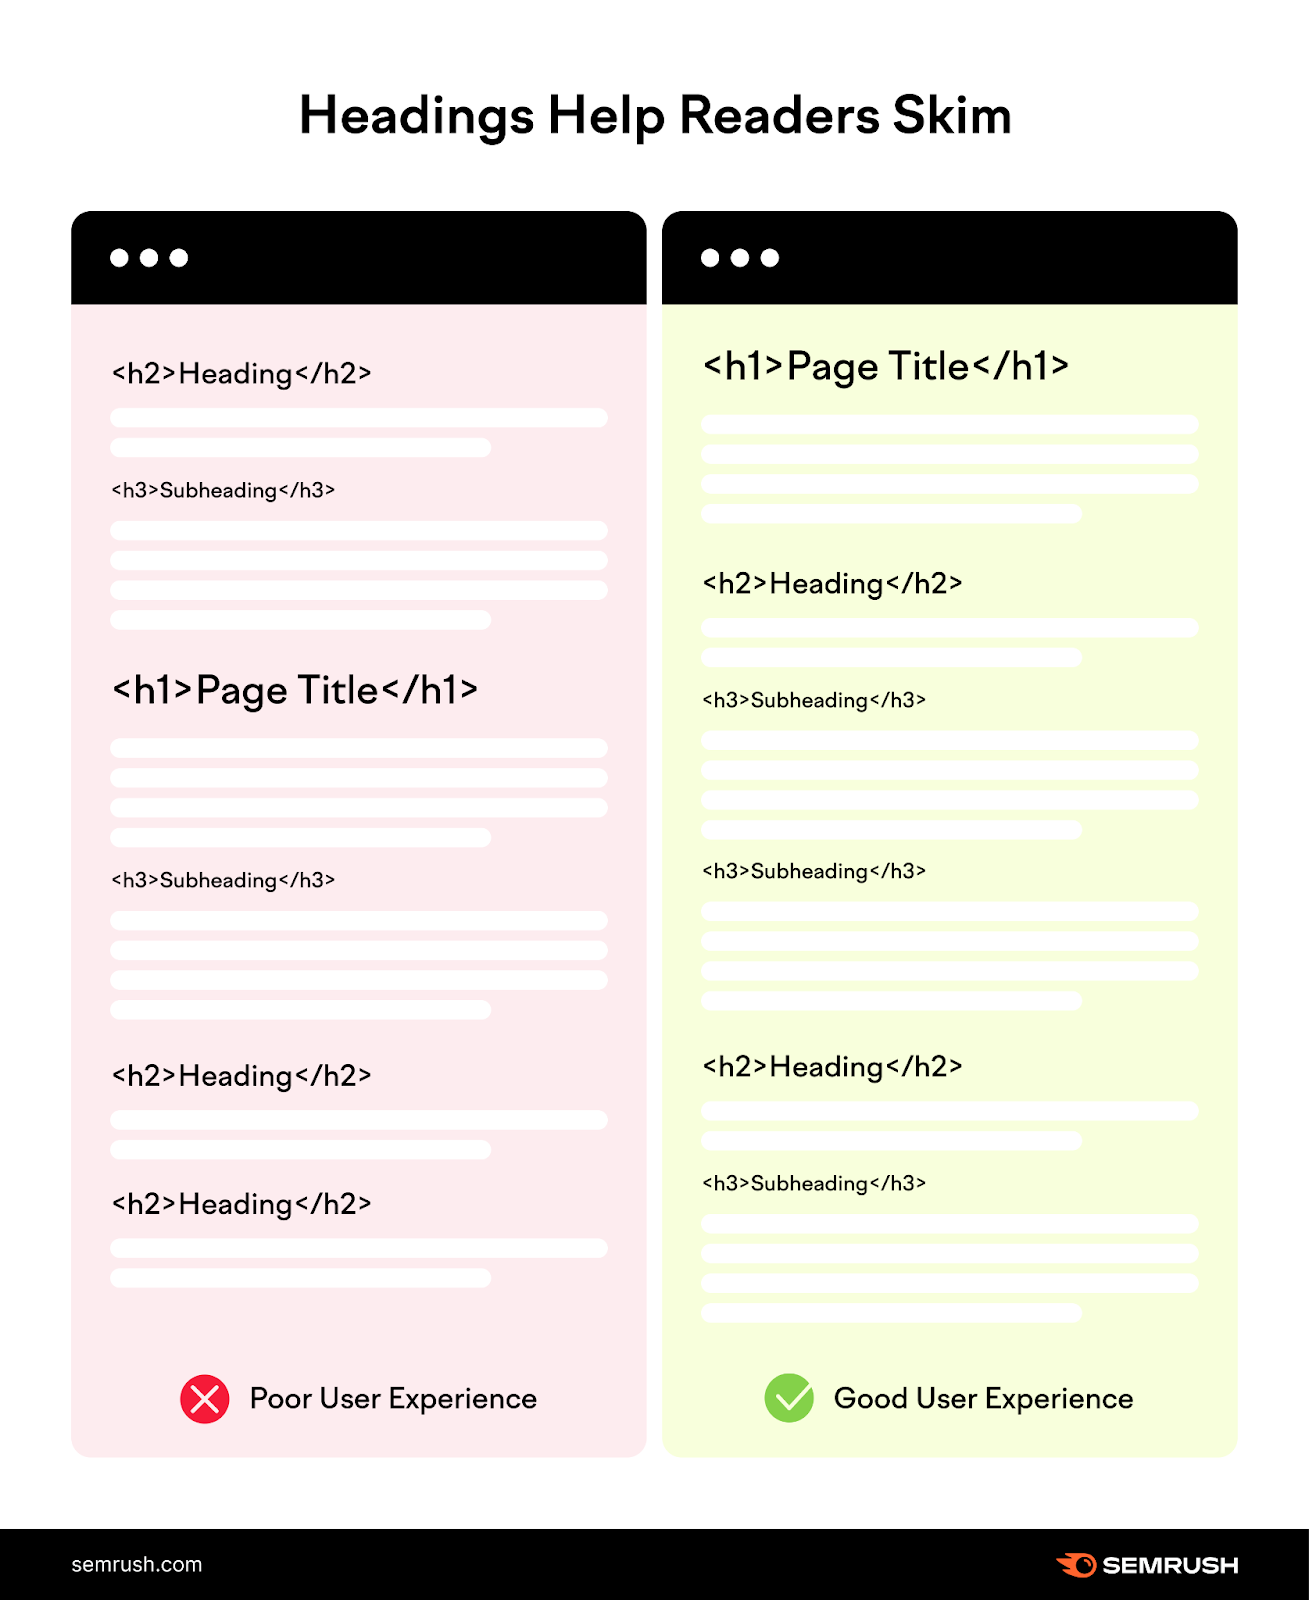 Heading helps readers skip content and improve user experience